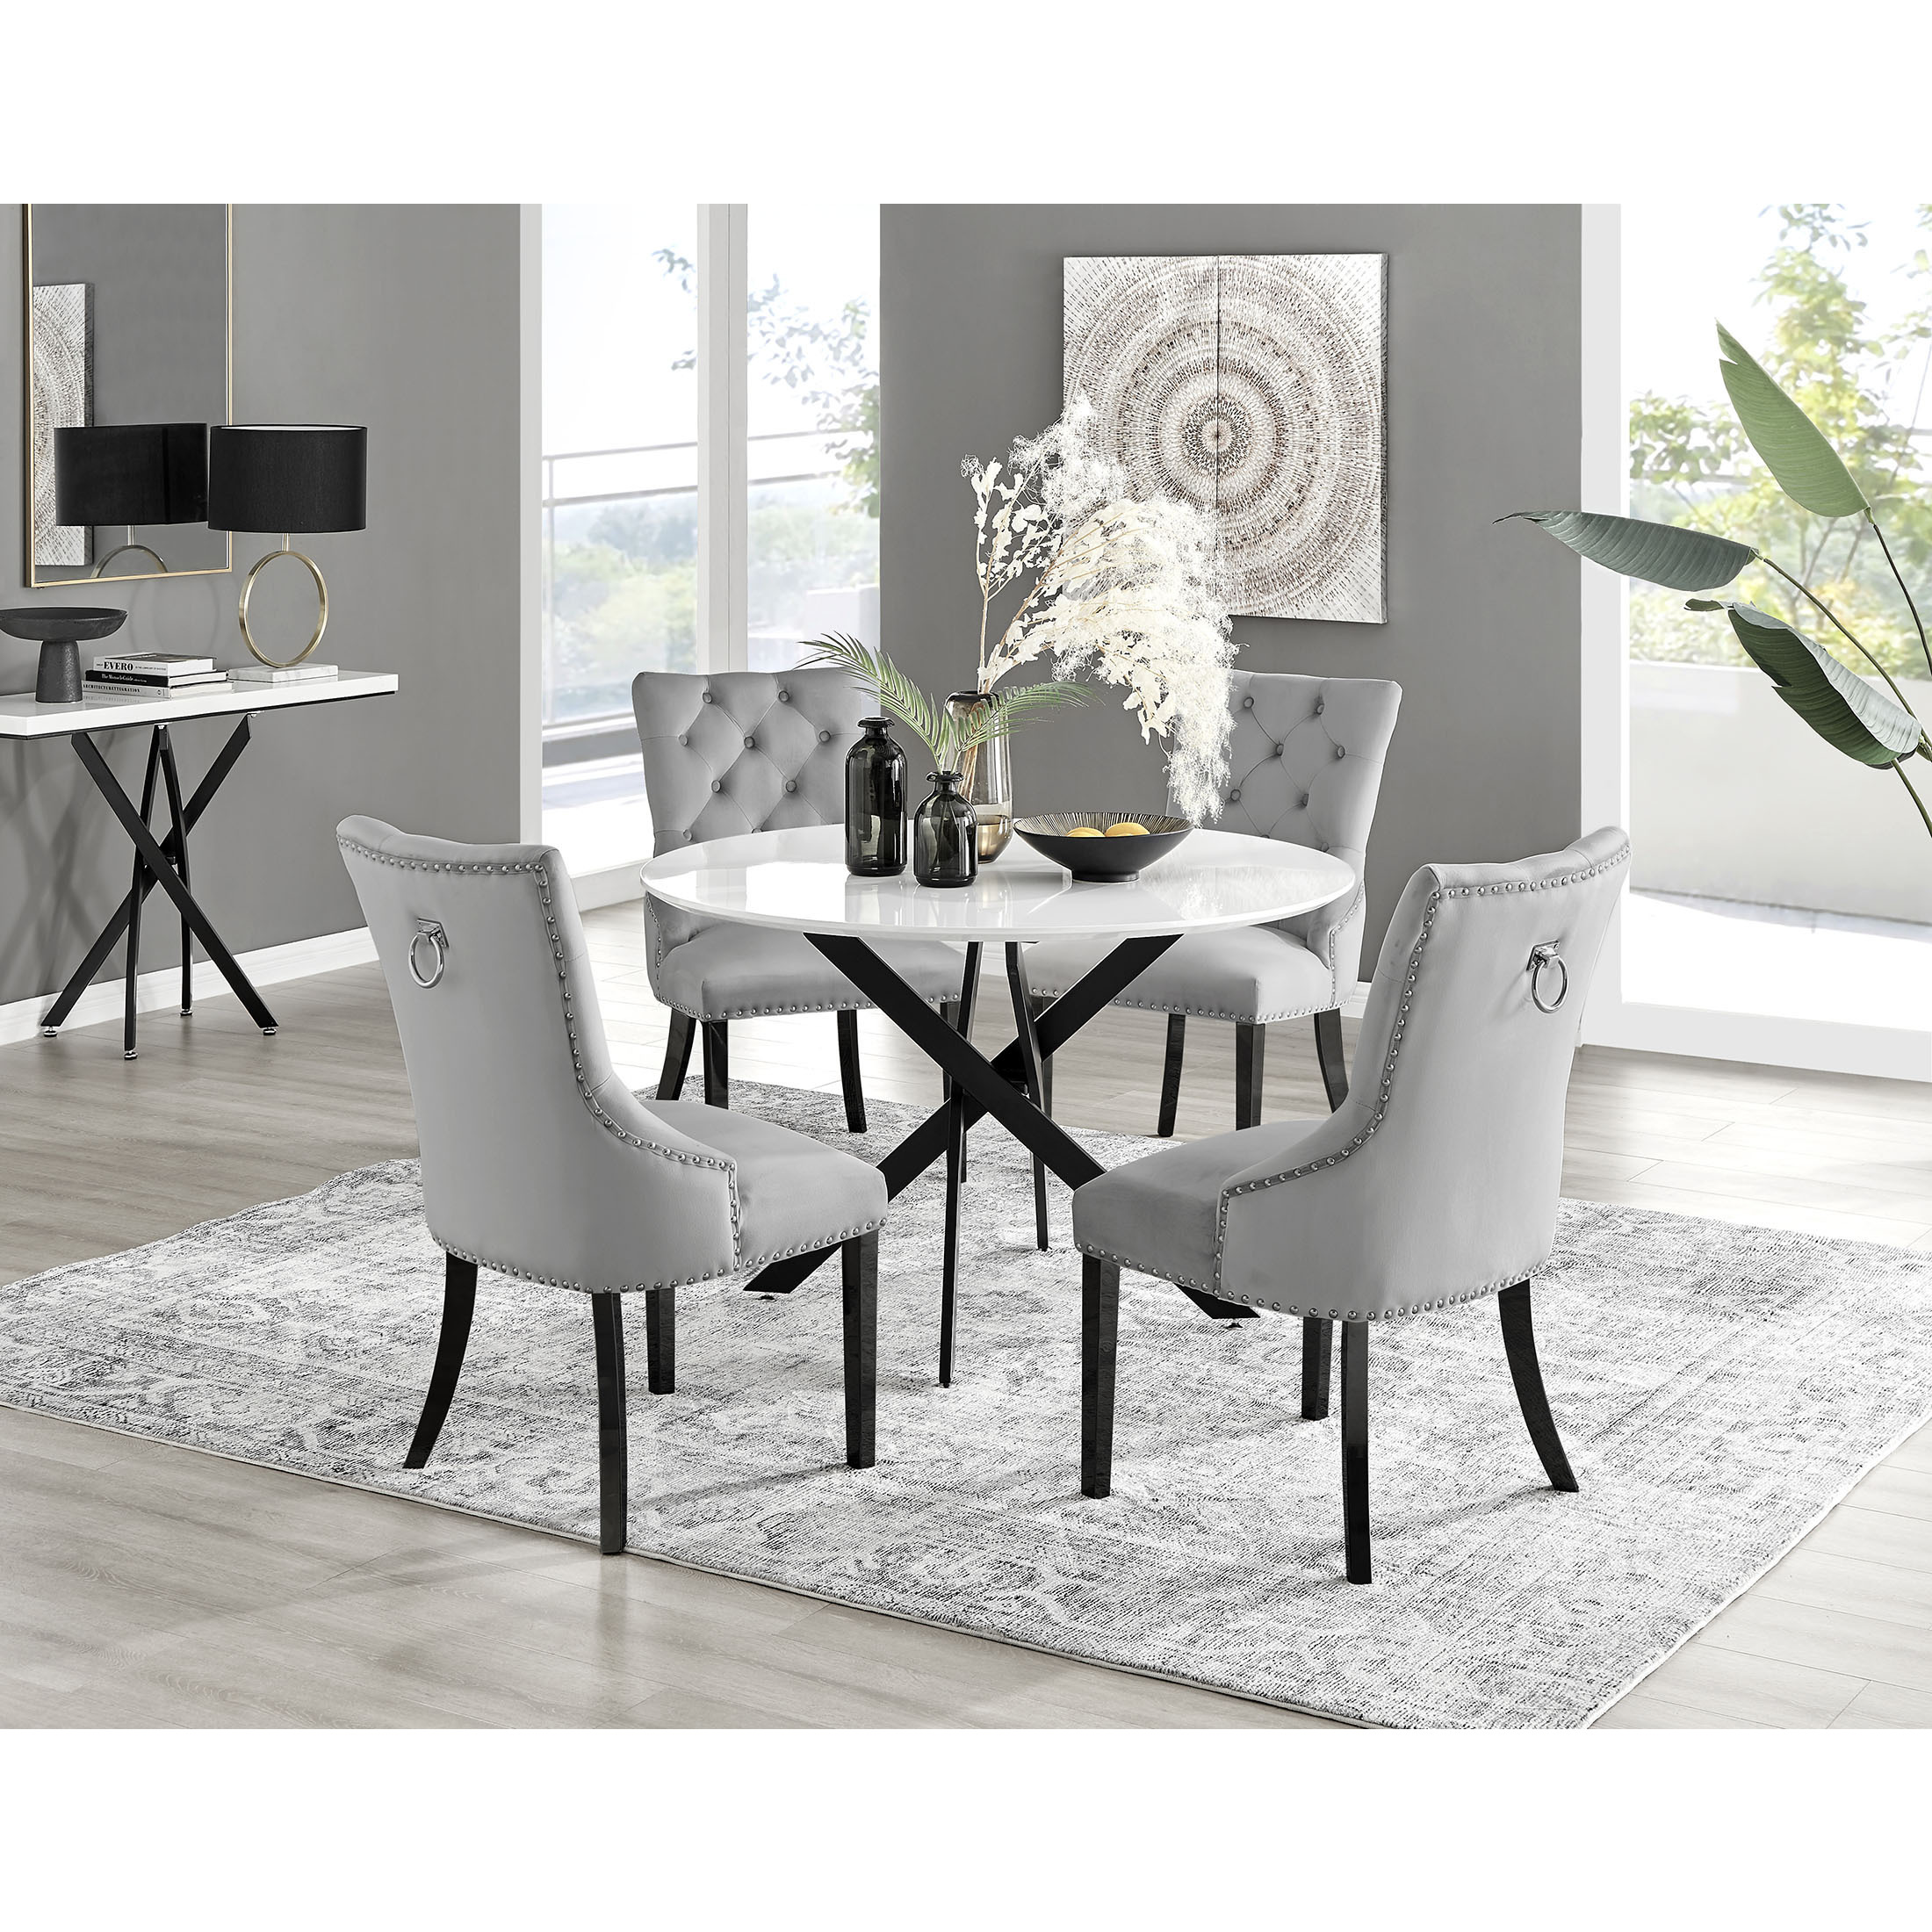 LIRA 120cm White Extending Dining Table and 6 Faux Leather Milan Dining  Chairs